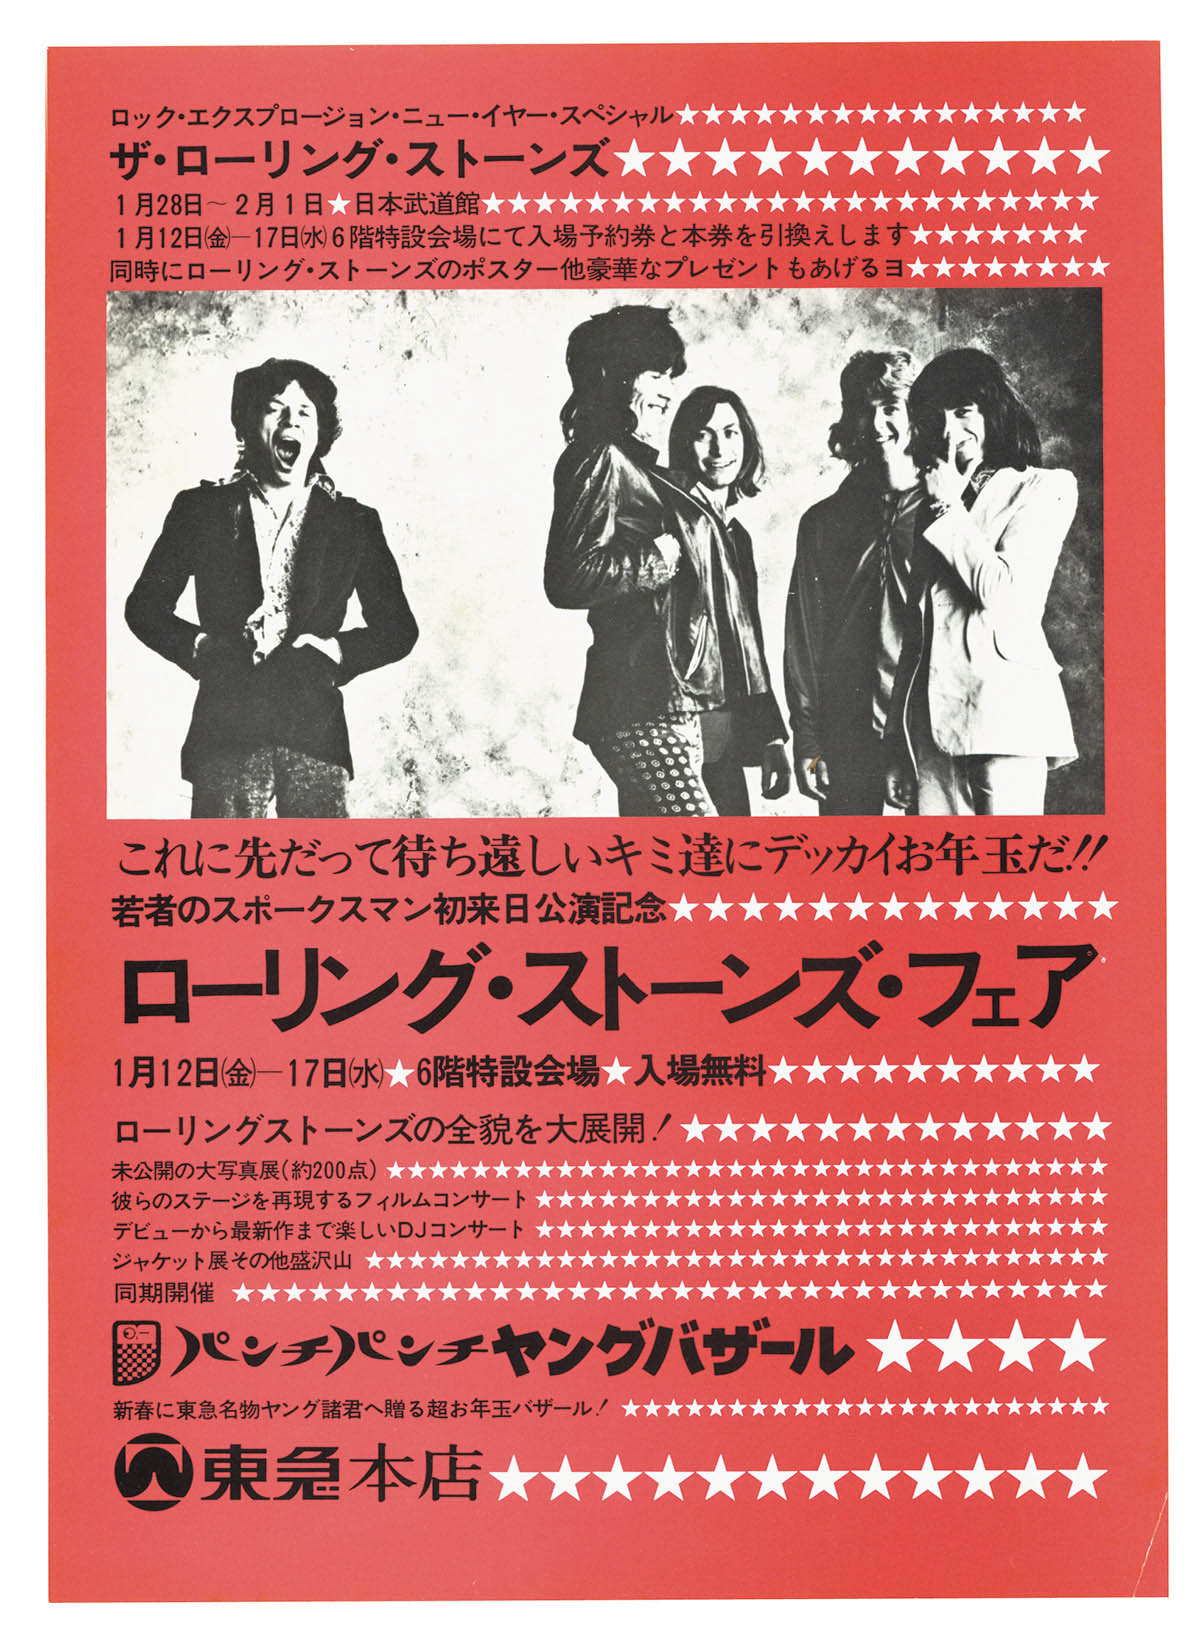 The Rolling Stones「1973年幻の初来日公演 ちらし ローリング